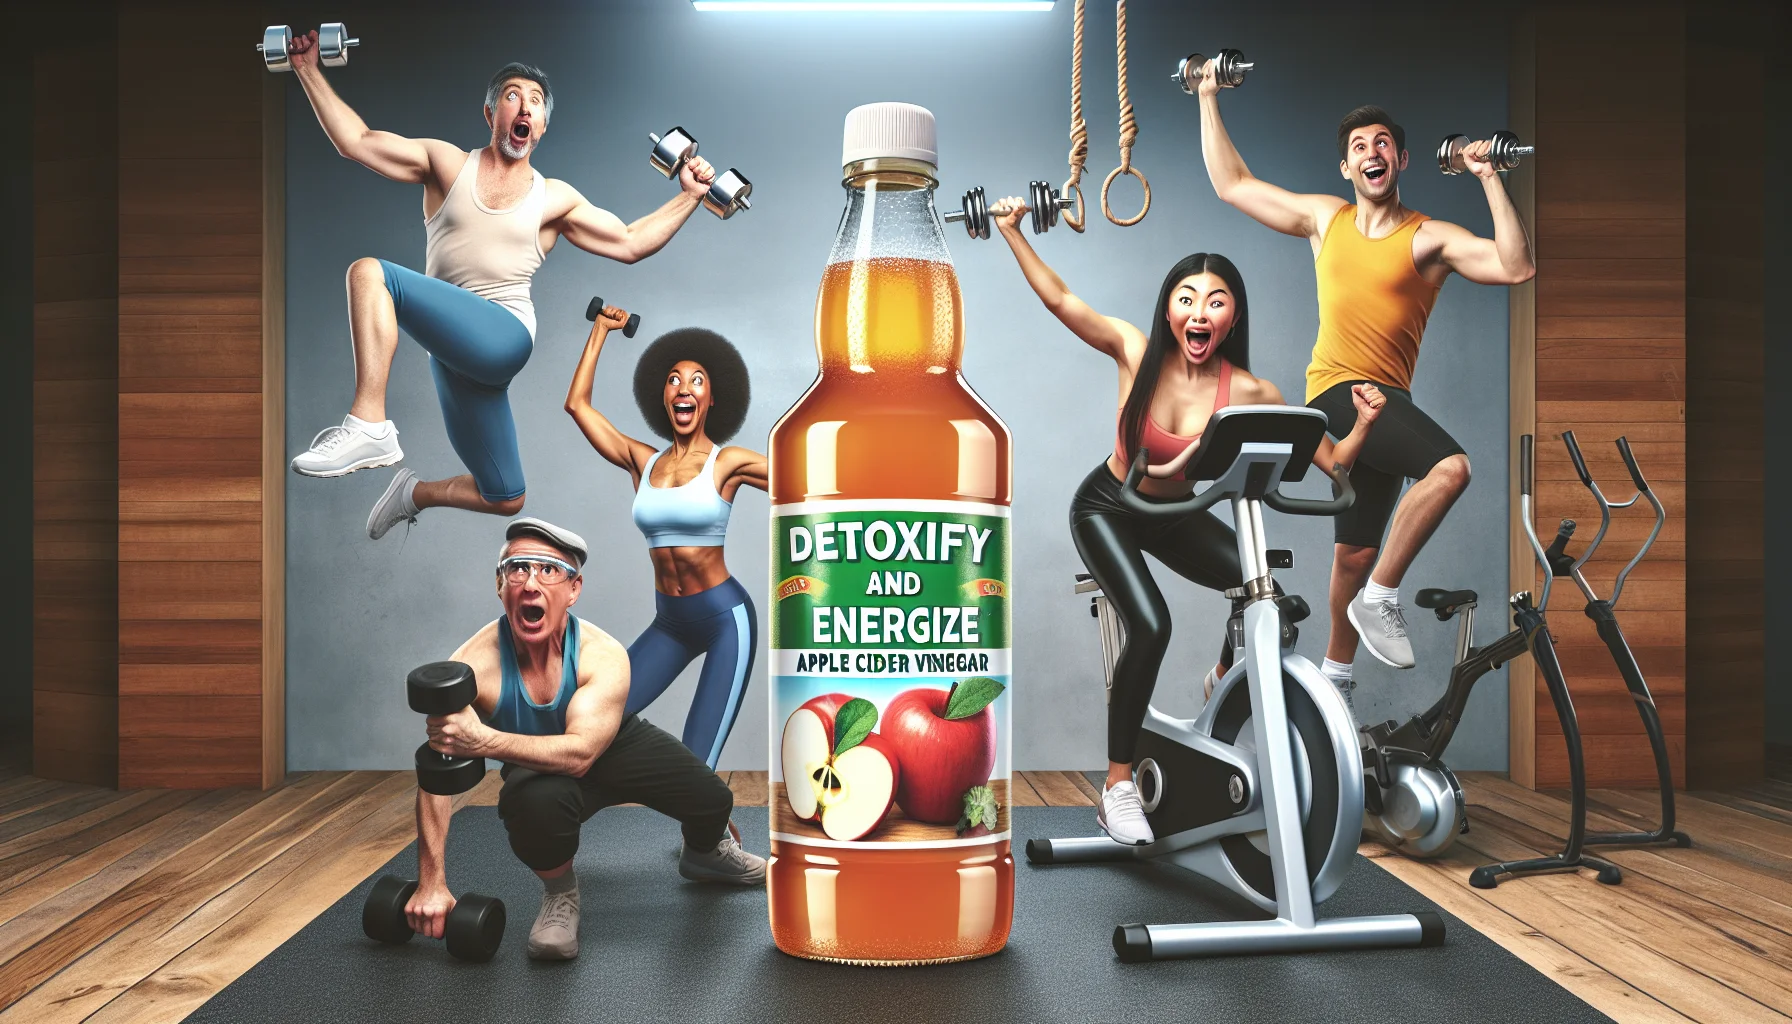 Create a humorous and enticing image showcasing a fictitious healthy fitness drink called 'Detoxify and Energize: Apple Cider Vinegar'. The drink bottle should be prominently displayed with a bright and catchy label. The background scene should consist of a gym setting abuzz with individuals of varying genders and descents: a middle-aged Caucasian man attempting a yoga pose, a young Hispanic woman energetically lifting light dumbbells, an older South-Asian male energetically pedaling on a stationary bike, and a youthful black woman holding a pose on a balance beam. Each person has a bottle of the fitness drink in hand, their expressions comically exaggerated to show enthusiasm and energy.